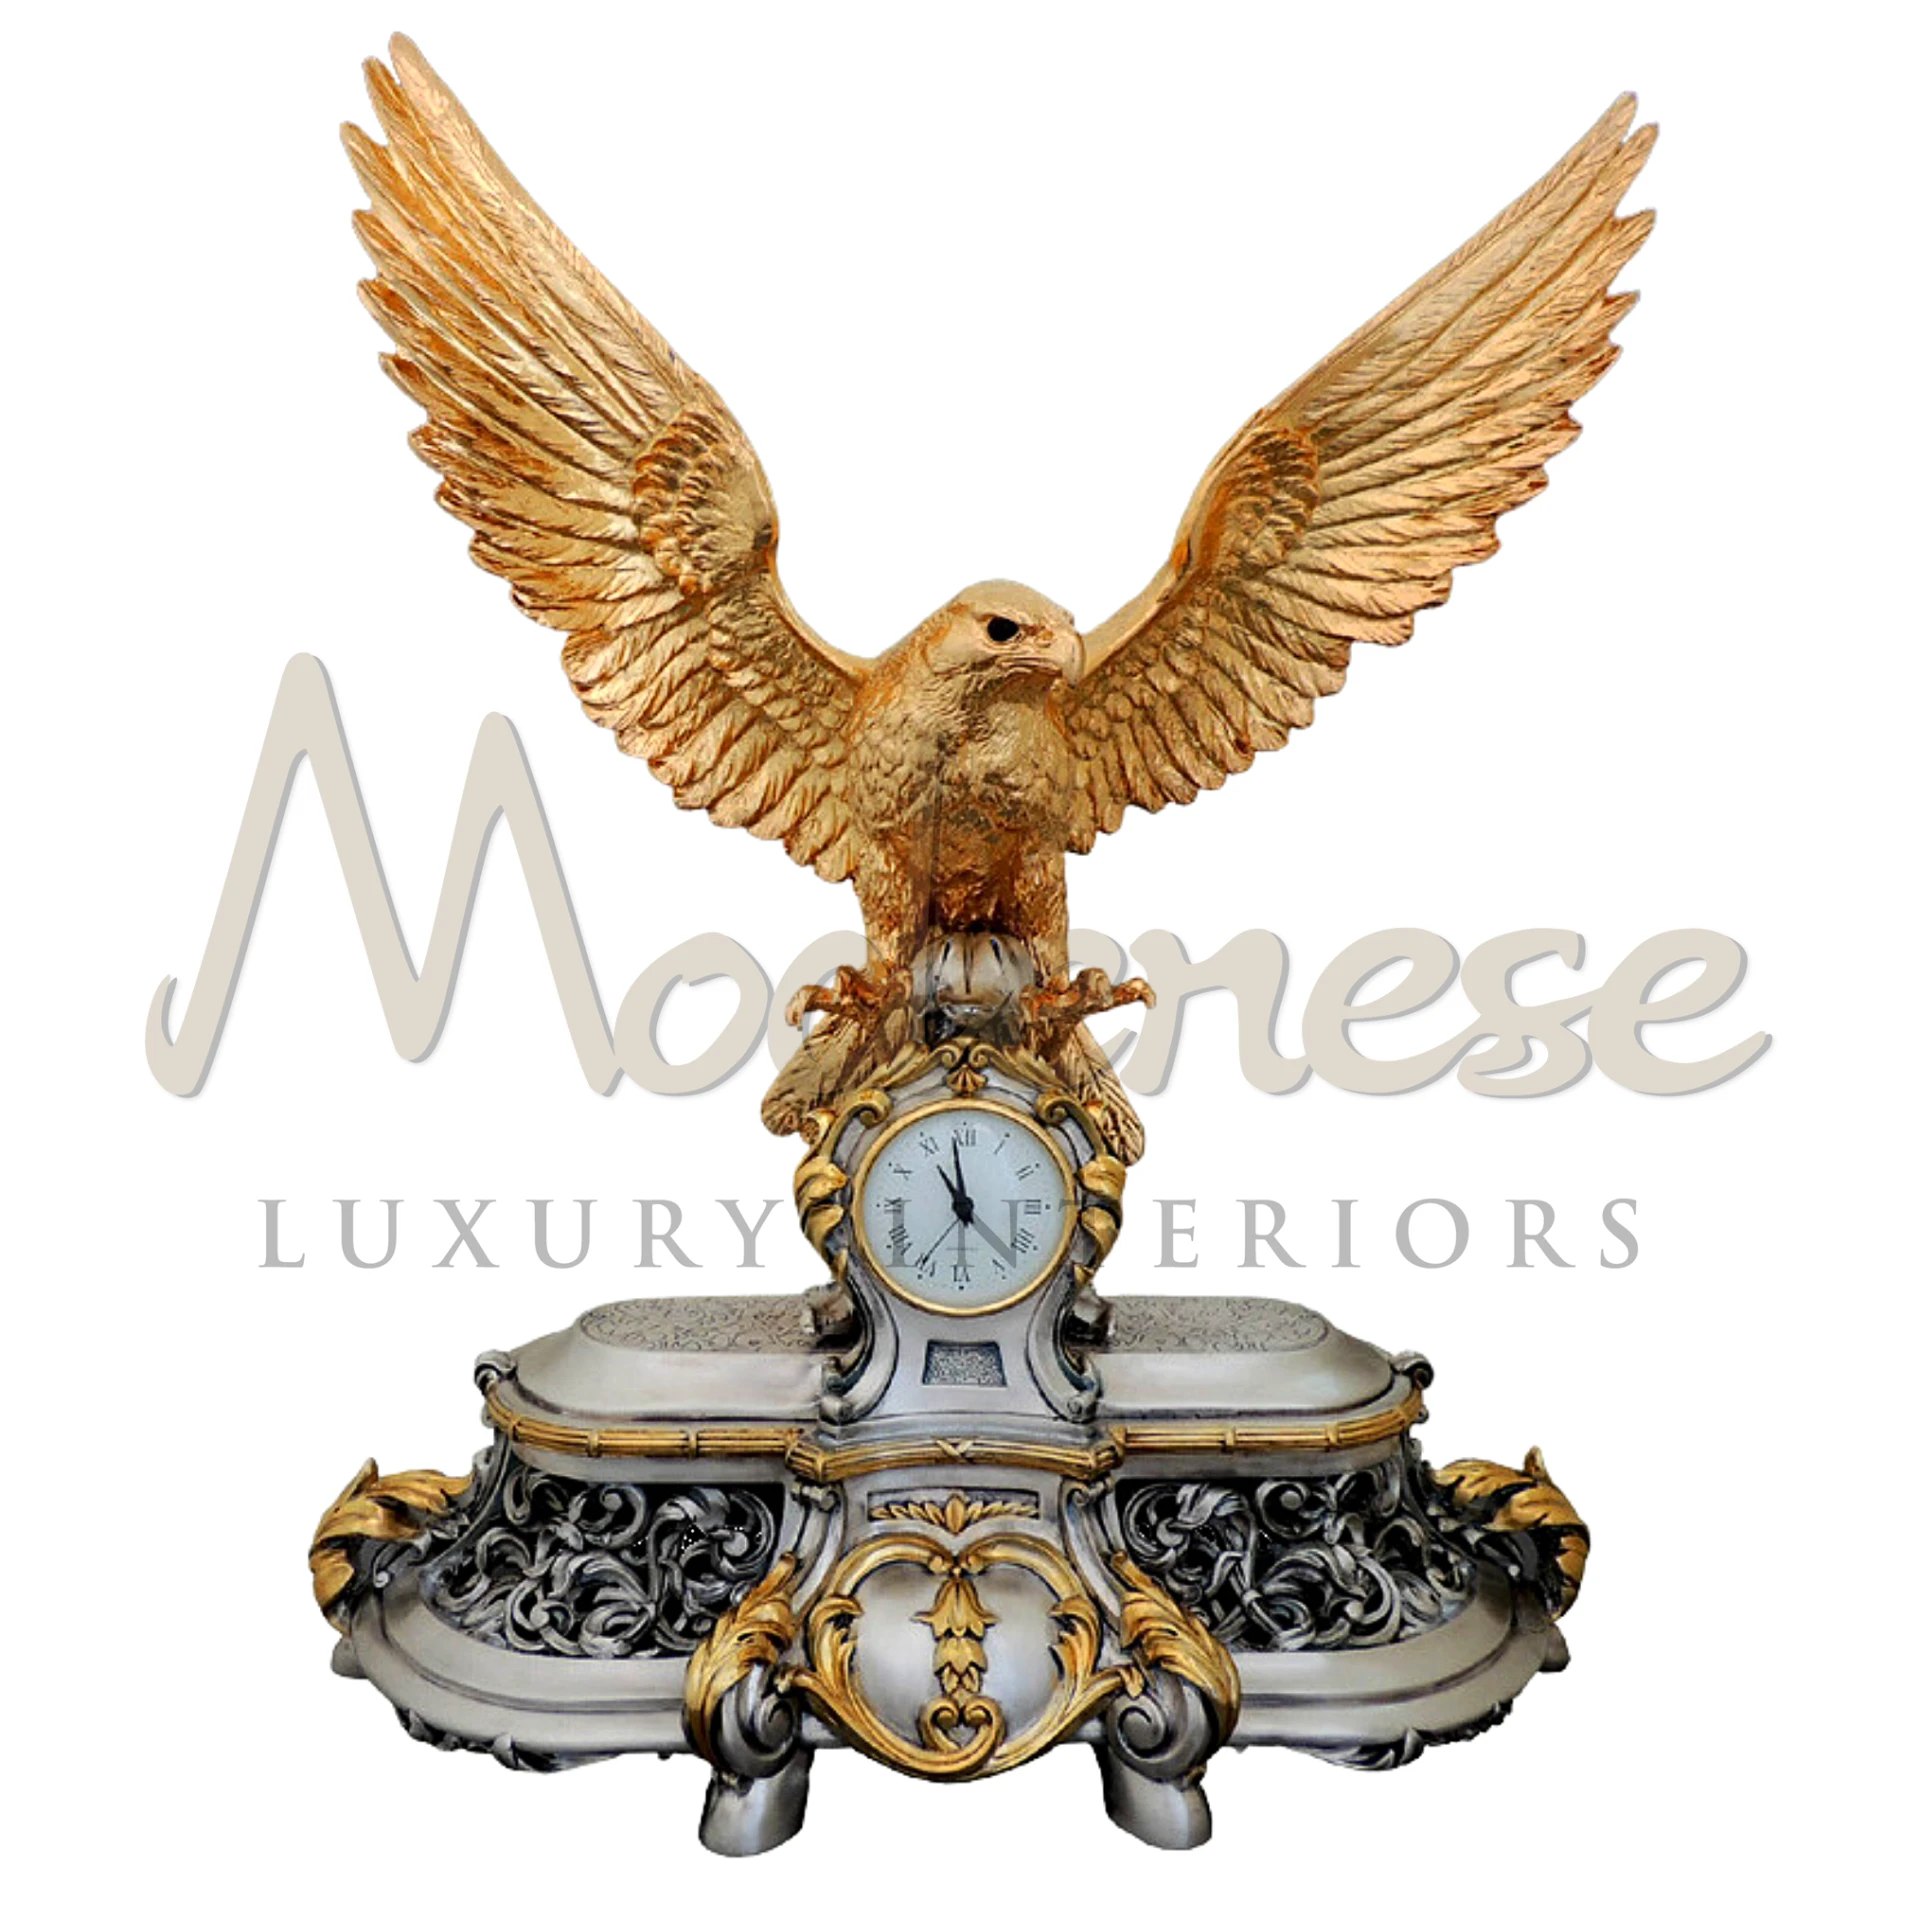 Gold Falcon Table Clock with intricate detailing, a luxurious blend of functionality and style, ideal for enhancing the elegance of home or office decor.







